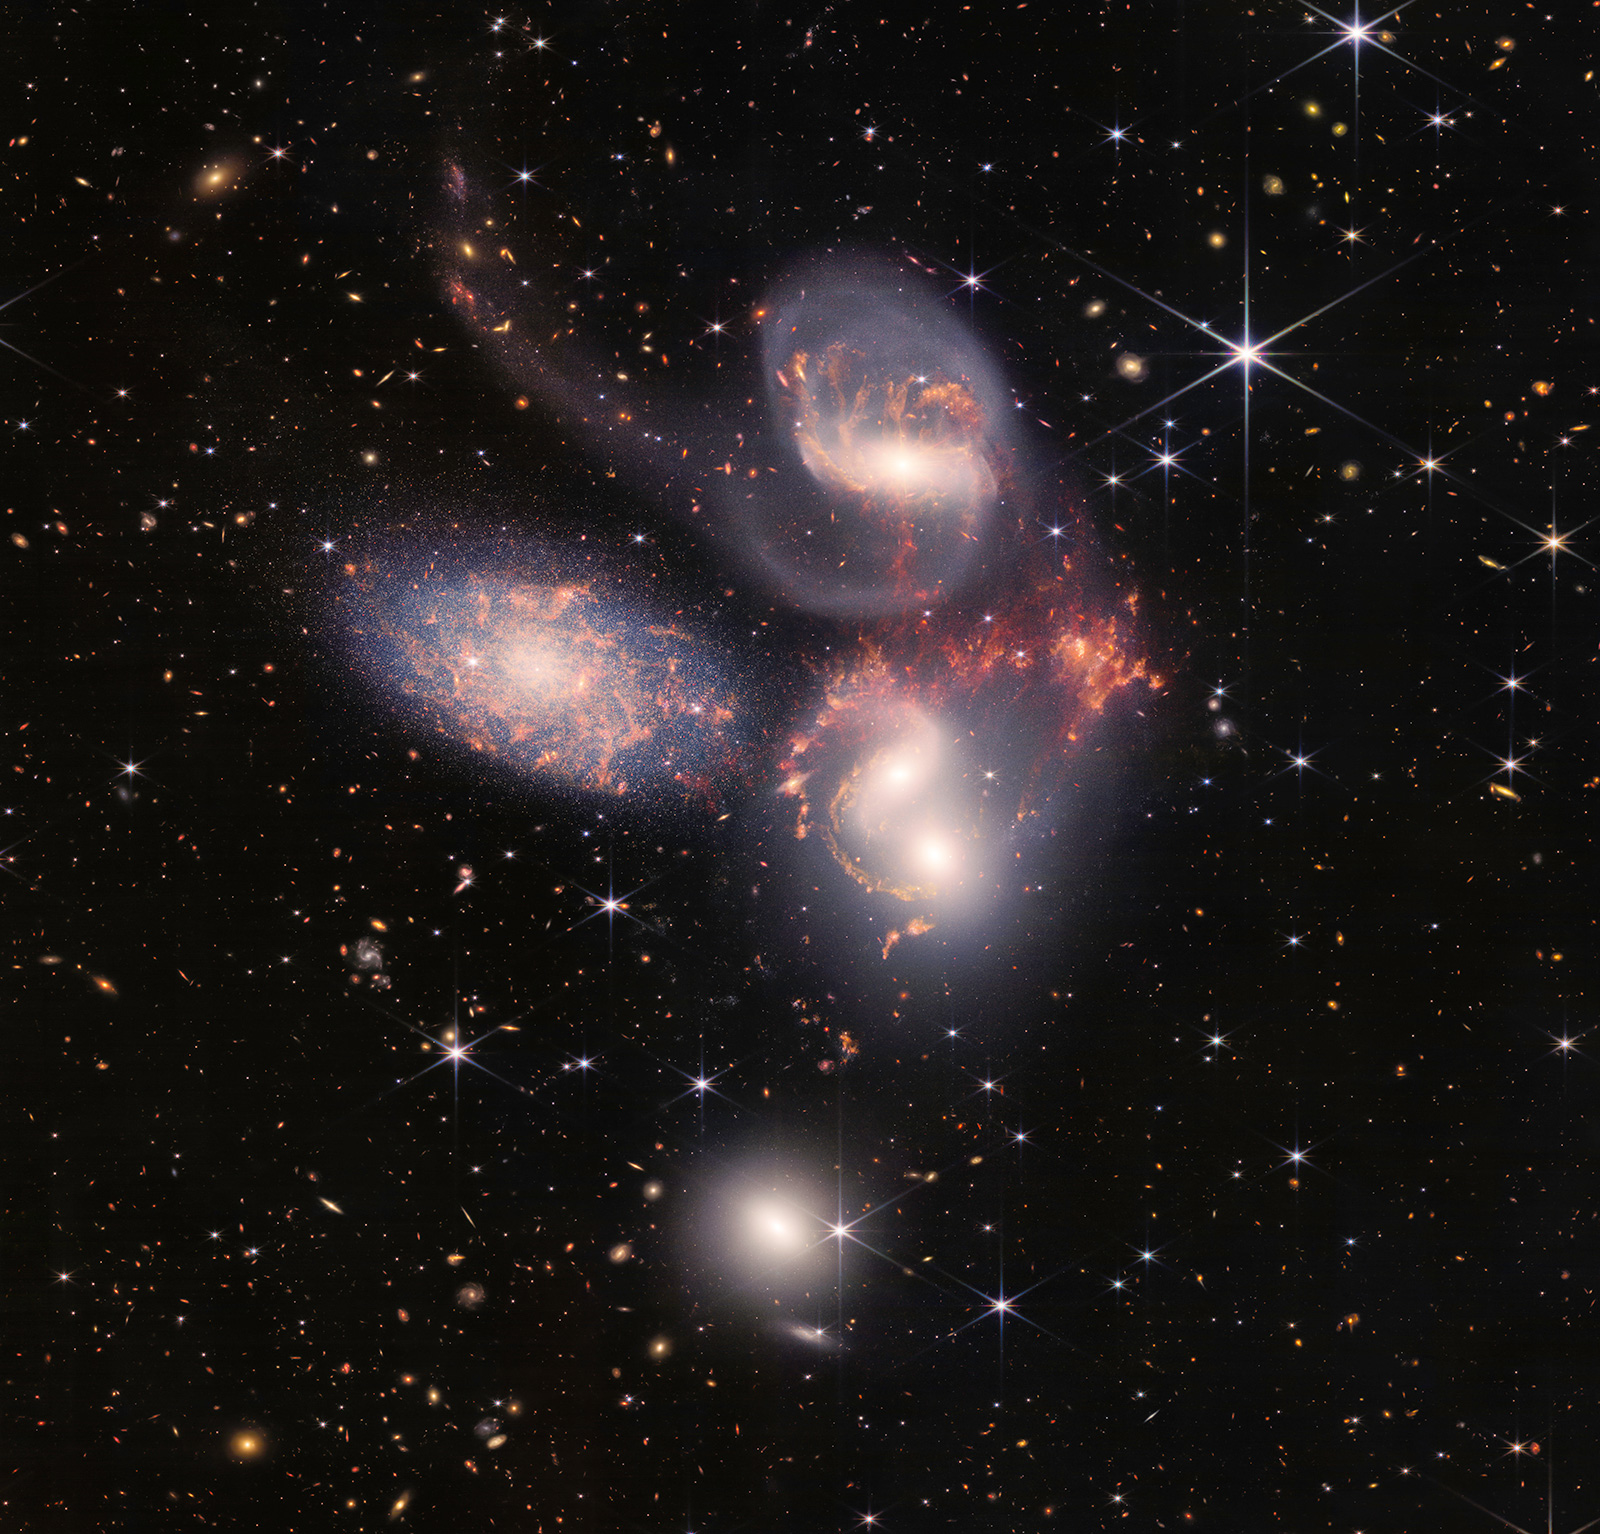 Today, NASA’s James Webb Space Telescope reveals Stephan’s Quintet, a visual grouping of five galaxies, in a new light. This enormous mosaic is Webb’s largest image to date, covering about one-fifth of the Moon’s diameter. It contains over 150 million pixels and is constructed from almost 1,000 separate image files. The information from Webb provides new insights into how galactic interactions may have driven galaxy evolution in the early universe.